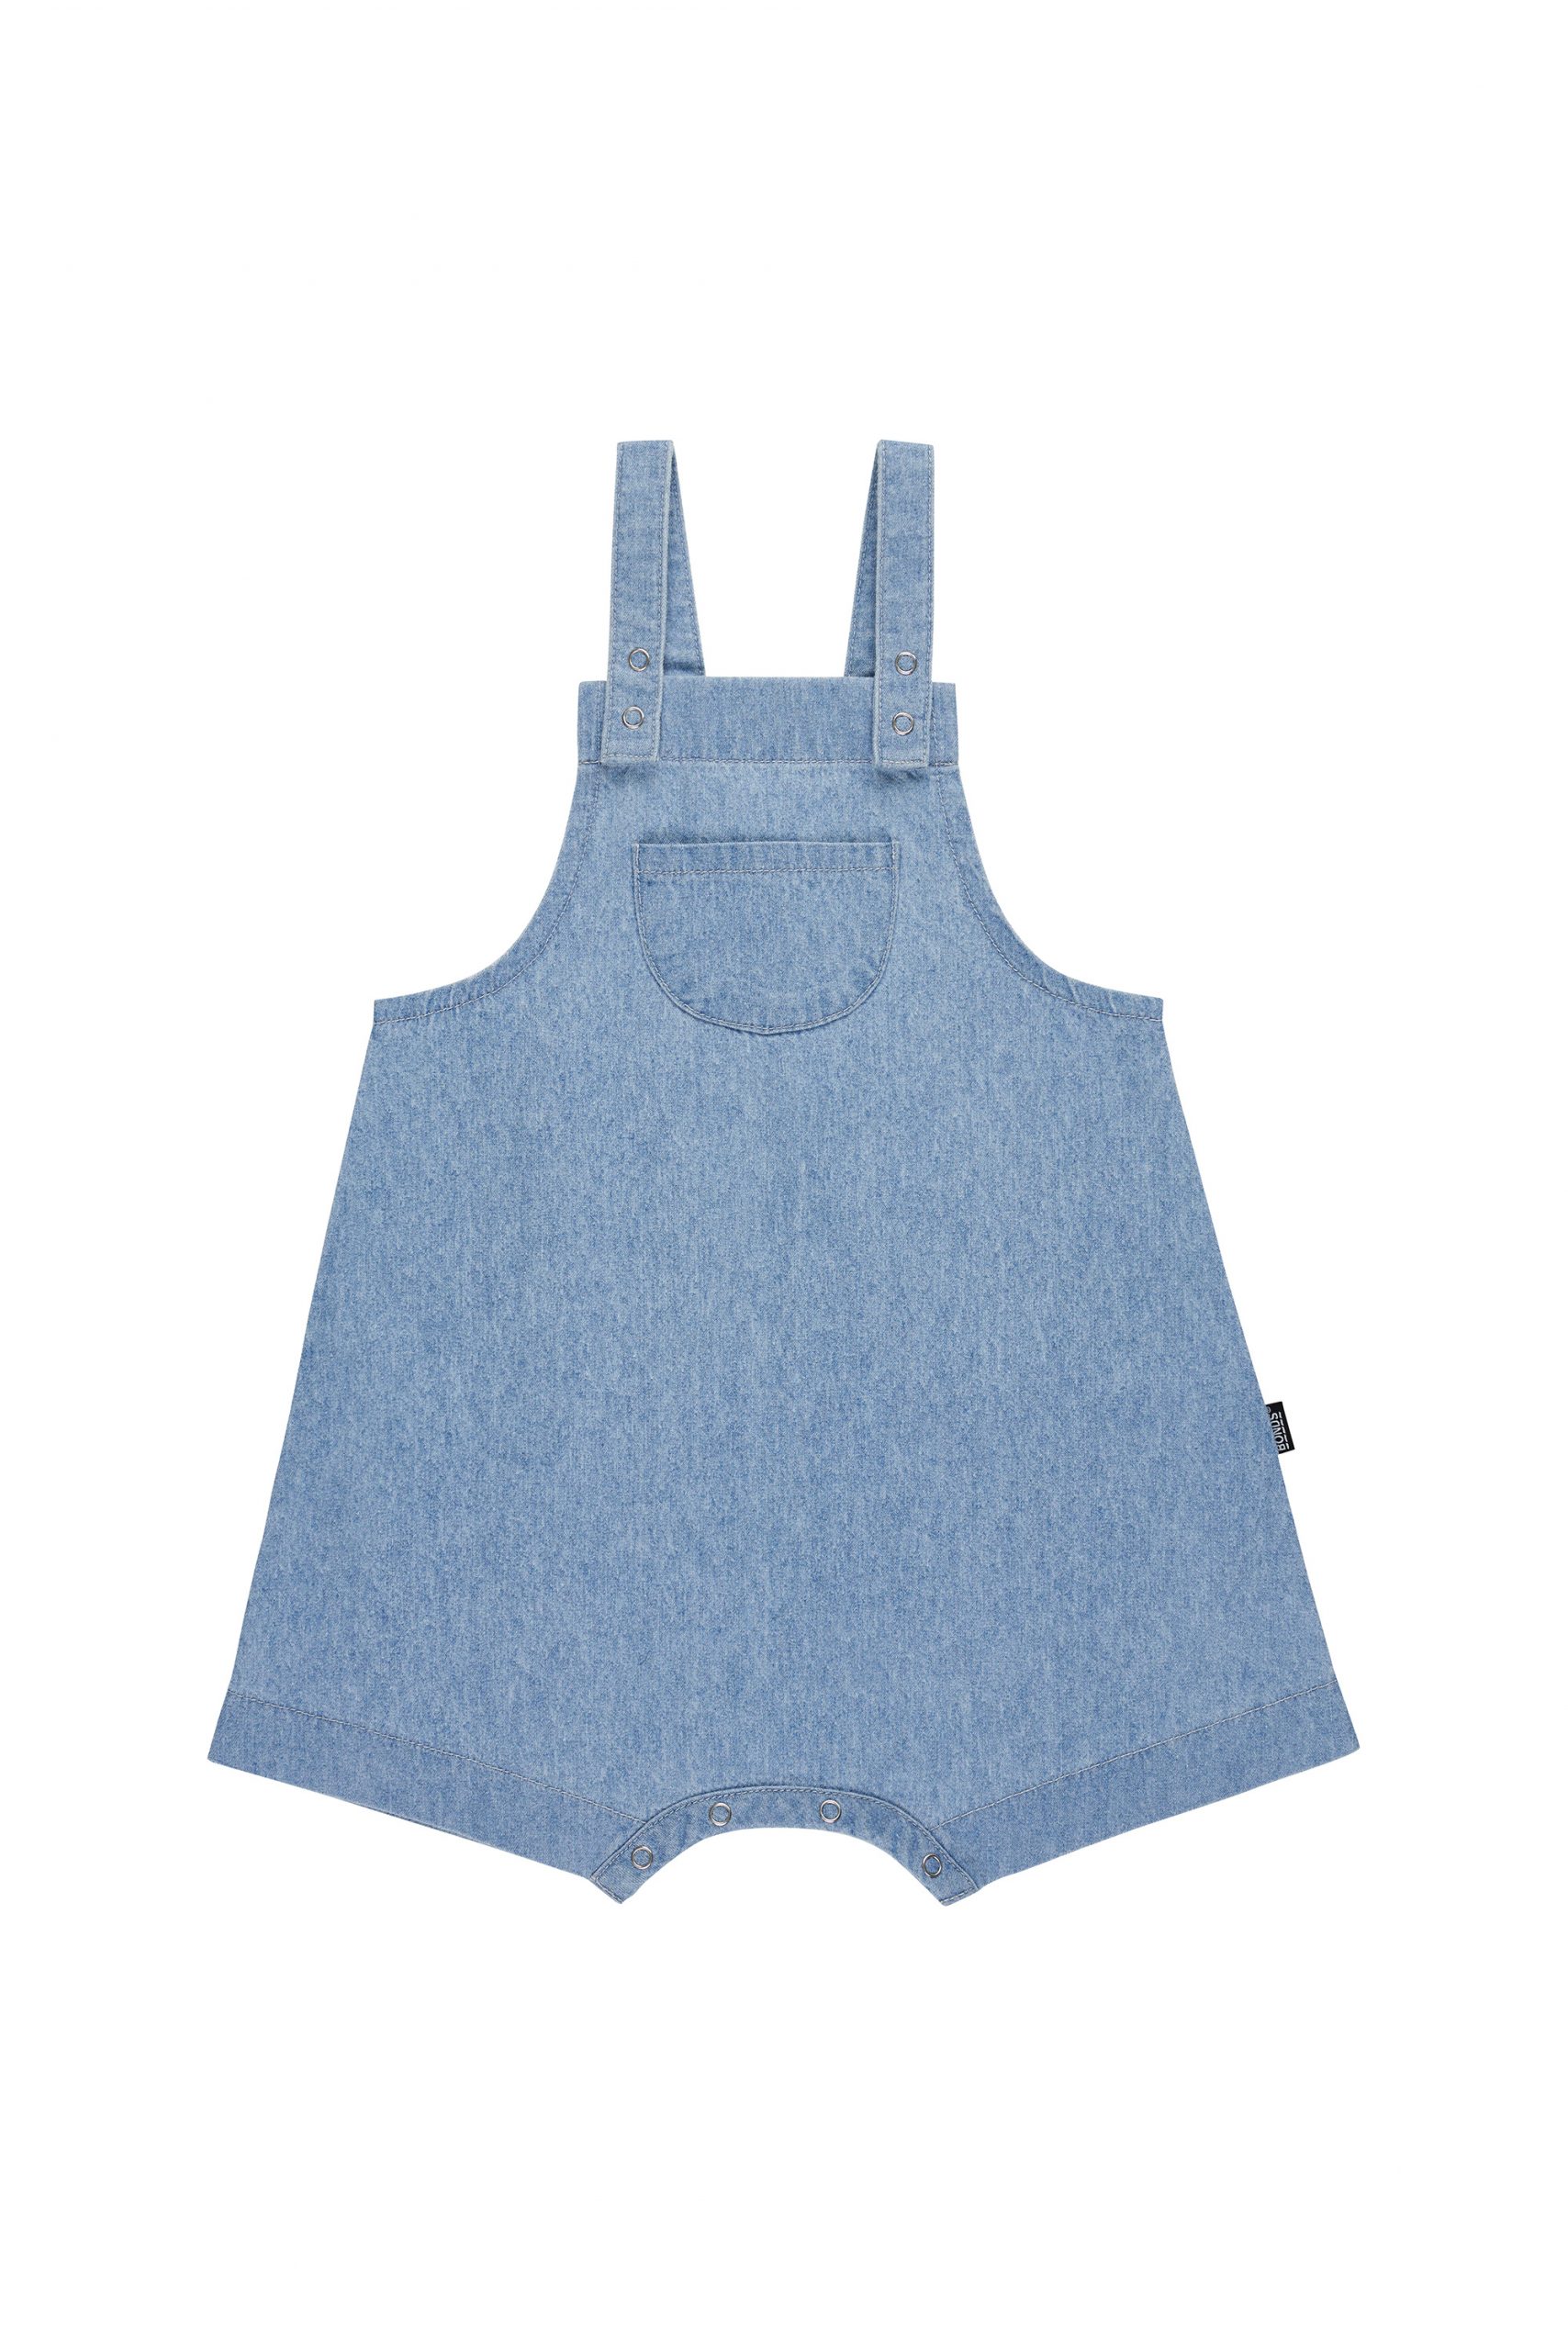 Purchase the OVERALL - Chambray Online – Tiny Turtles